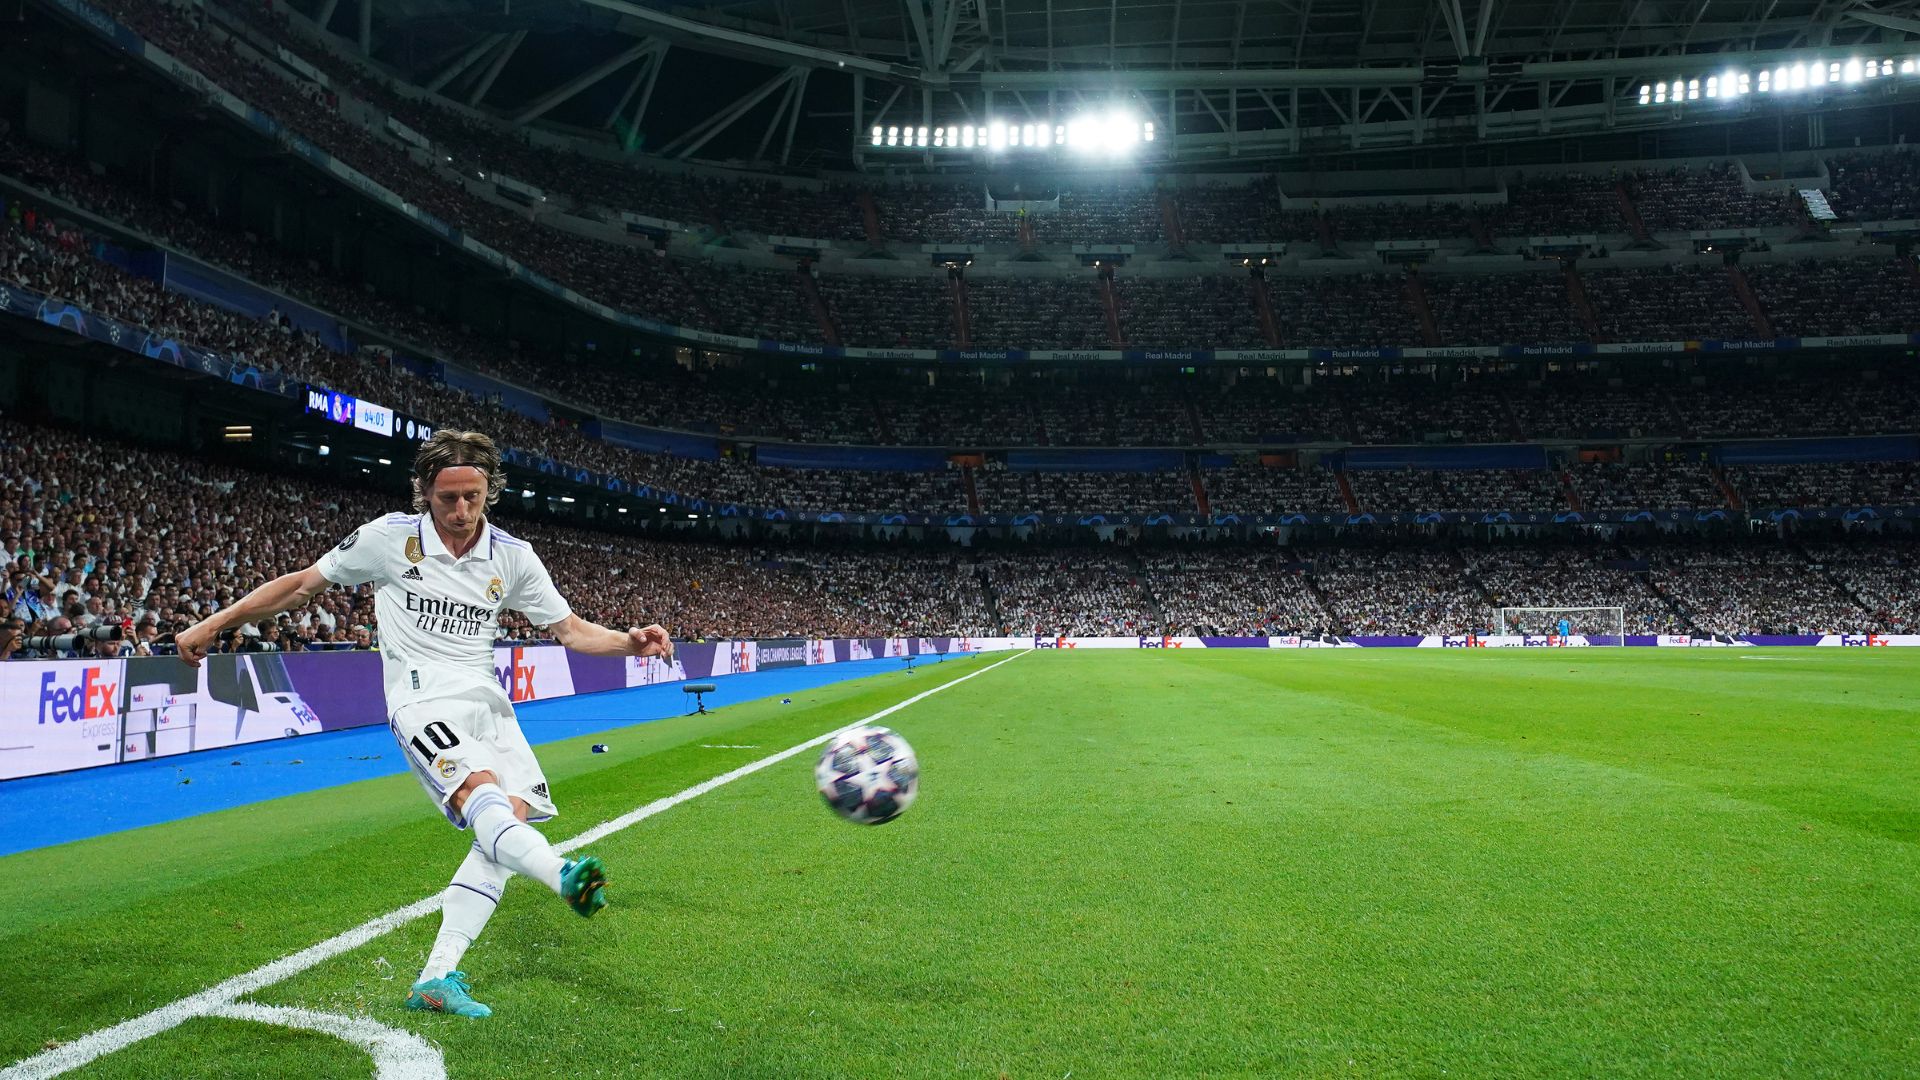 Modric taking a corner kick during the match against Manchester City (Credit: Getty Images)